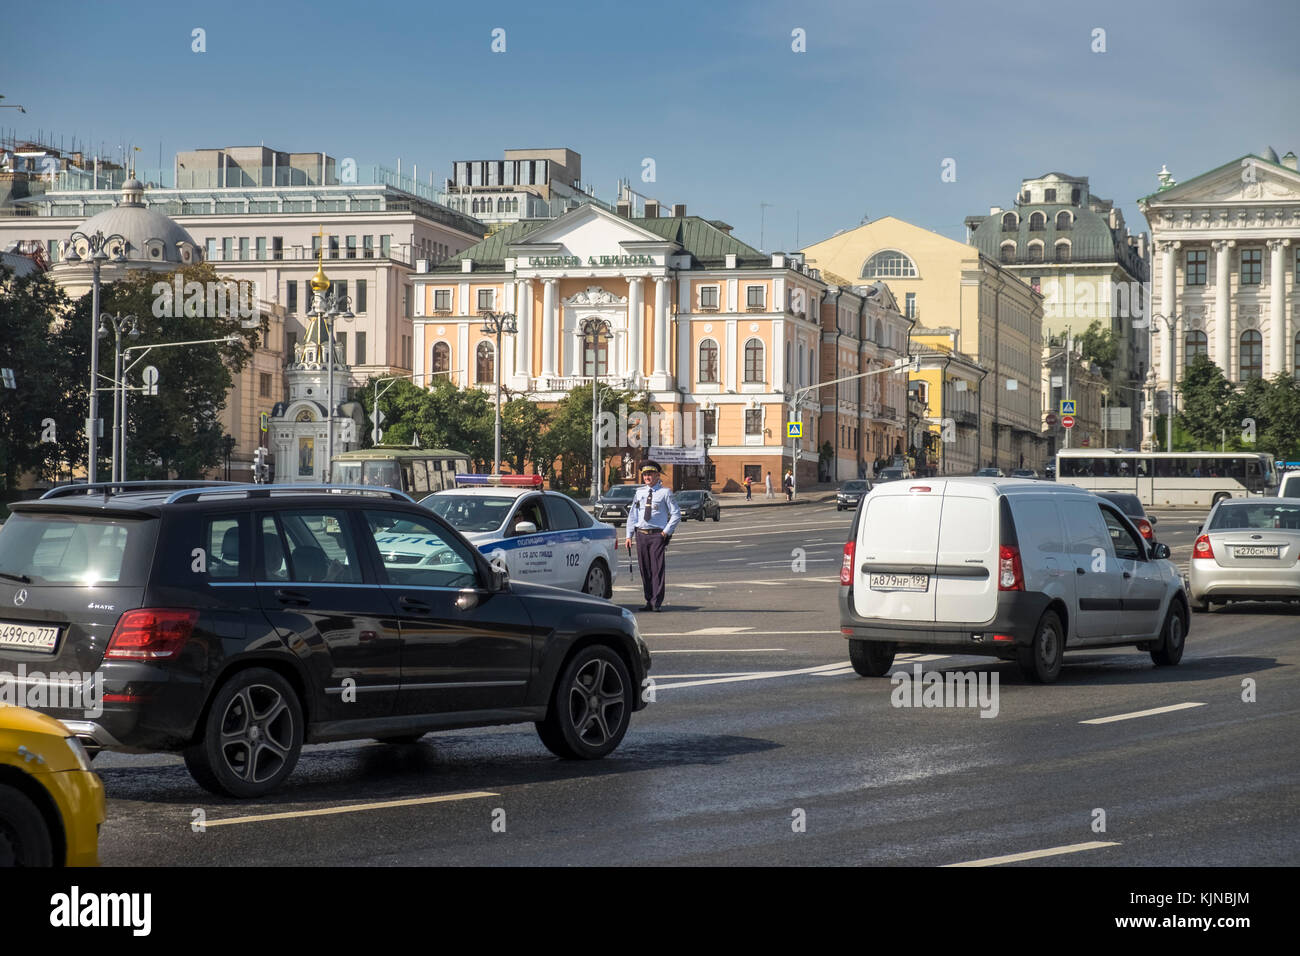 A police officer stands near traffic in Borovitskaya Ploshchad, Moscow, Russia. Stock Photo